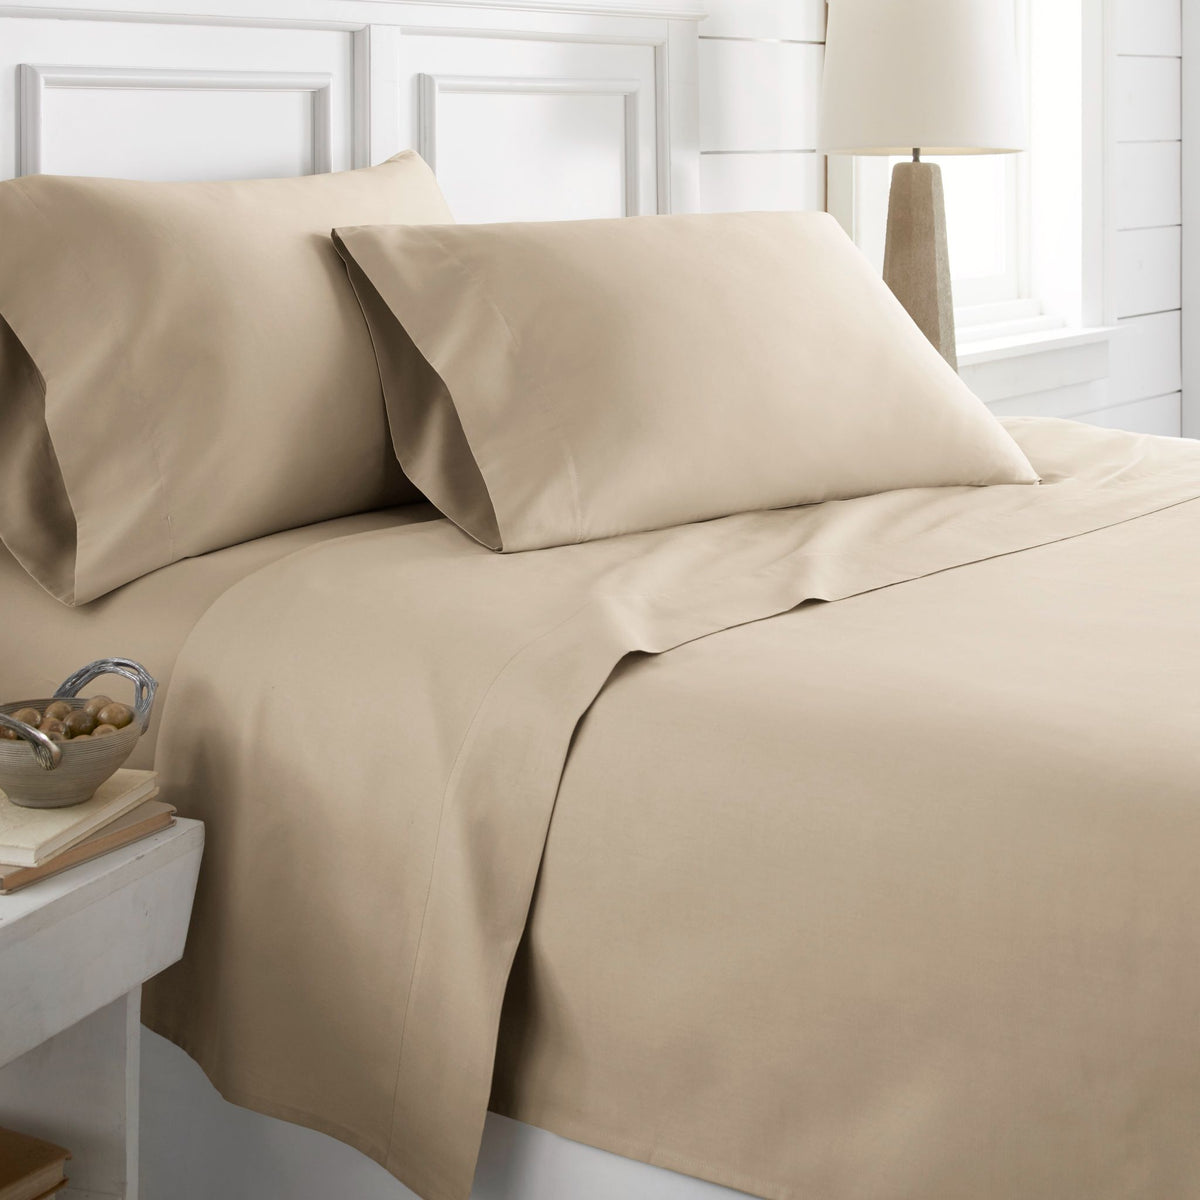 600 Thread Count Egyptian Cotton Sheets Buy Online REB